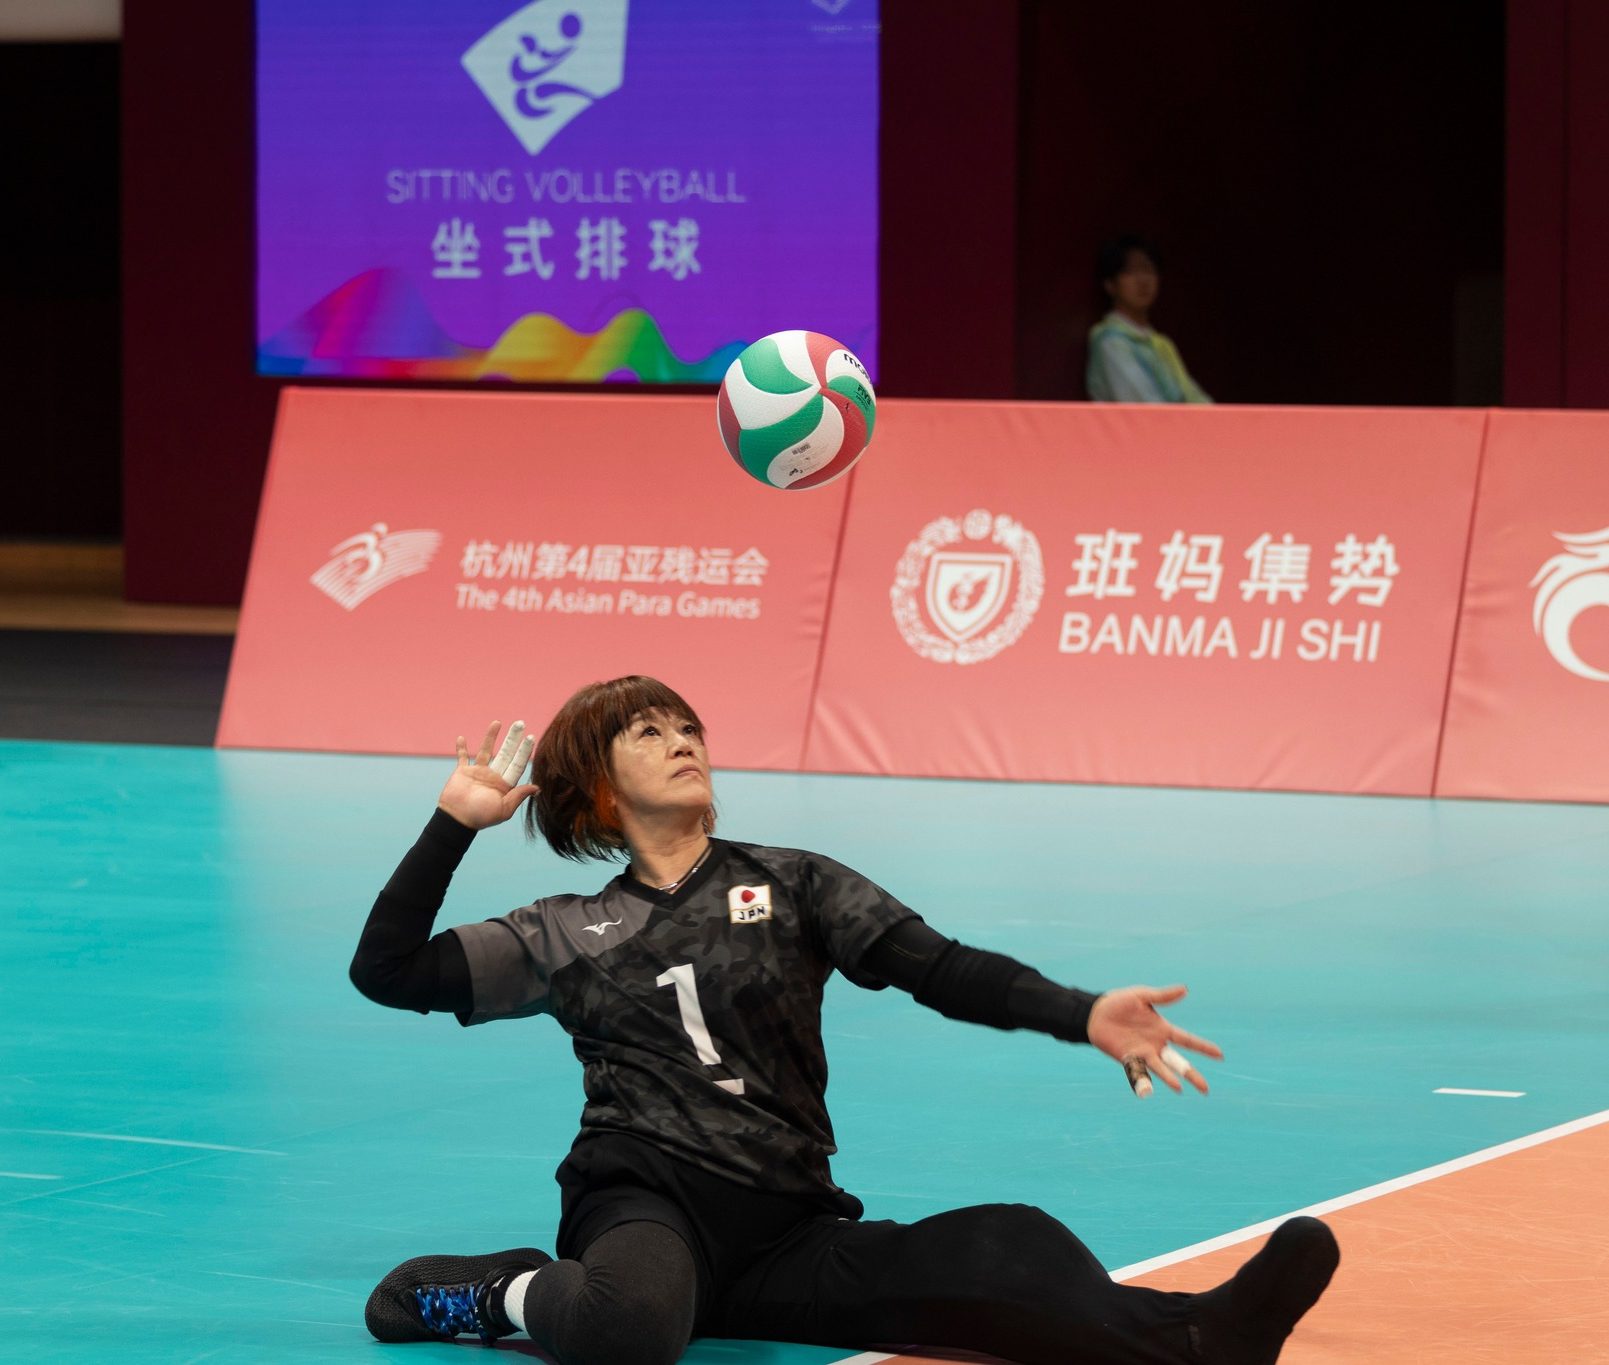 Sitting volleyball included in Aichi-Nagoya 2026 Asian Para Games sports programme